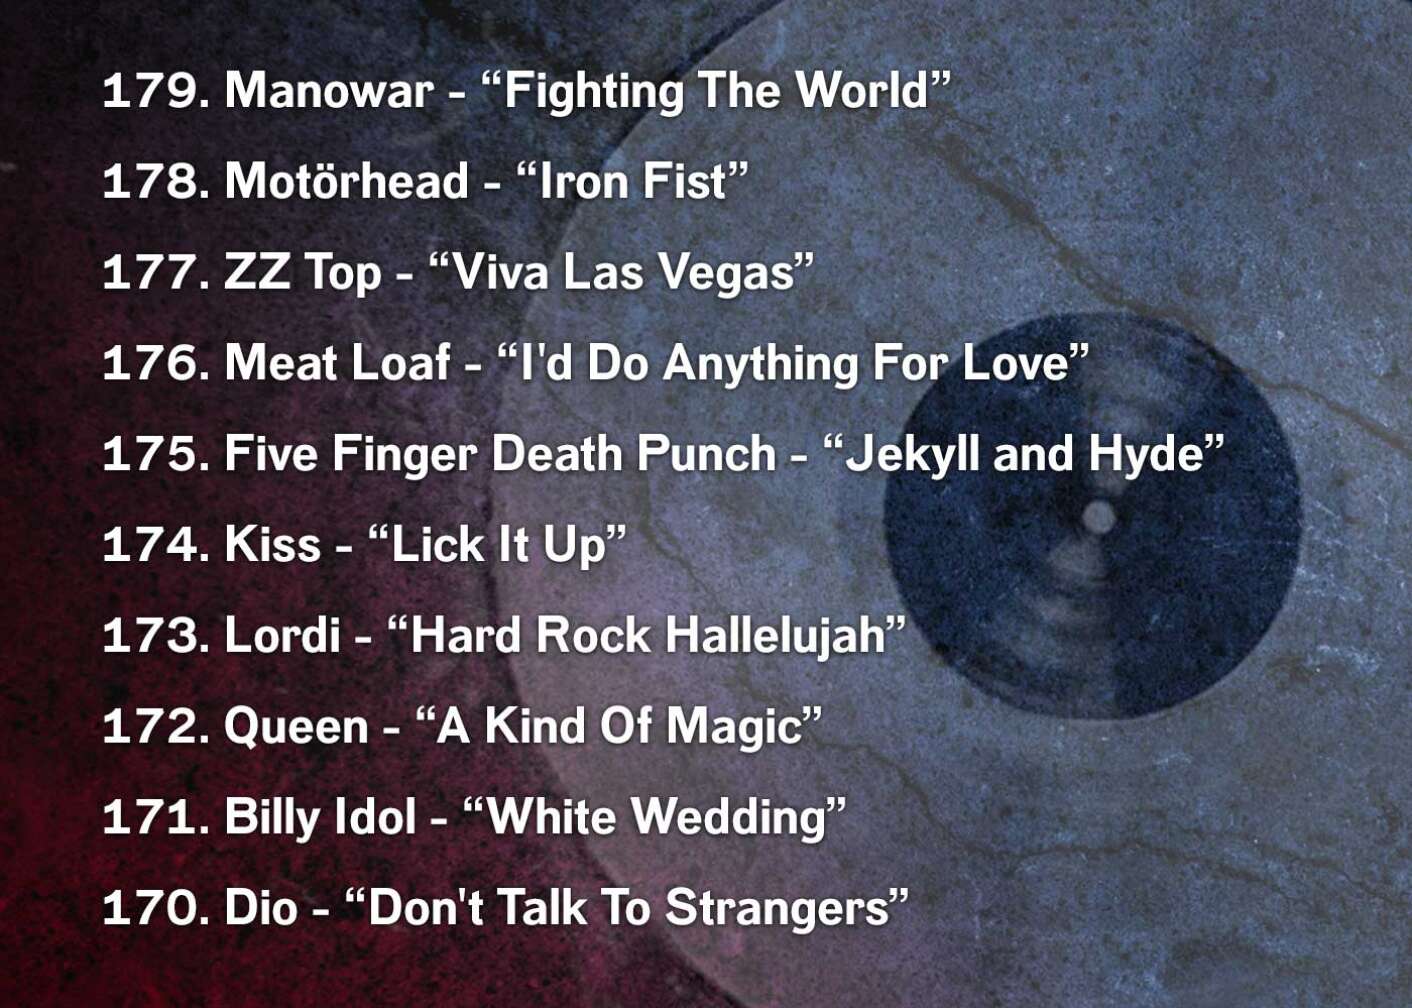 179. Manowar - “Fighting The World” 178. Motörhead - “Iron Fist” 177. ZZ Top - “Viva Las Vegas” 176. Meat Loaf - “I'd Do Anything For Love” 175. Five Finger Death Punch - “Jekyll and Hyde” 174. Kiss - “Lick It Up” 173. Lordi - “Hard Rock Hallelujah” 172. Queen - “A Kind Of Magic” 171. Billy Idol - “White Wedding” 170. Dio - “Don't Talk To Strangers”